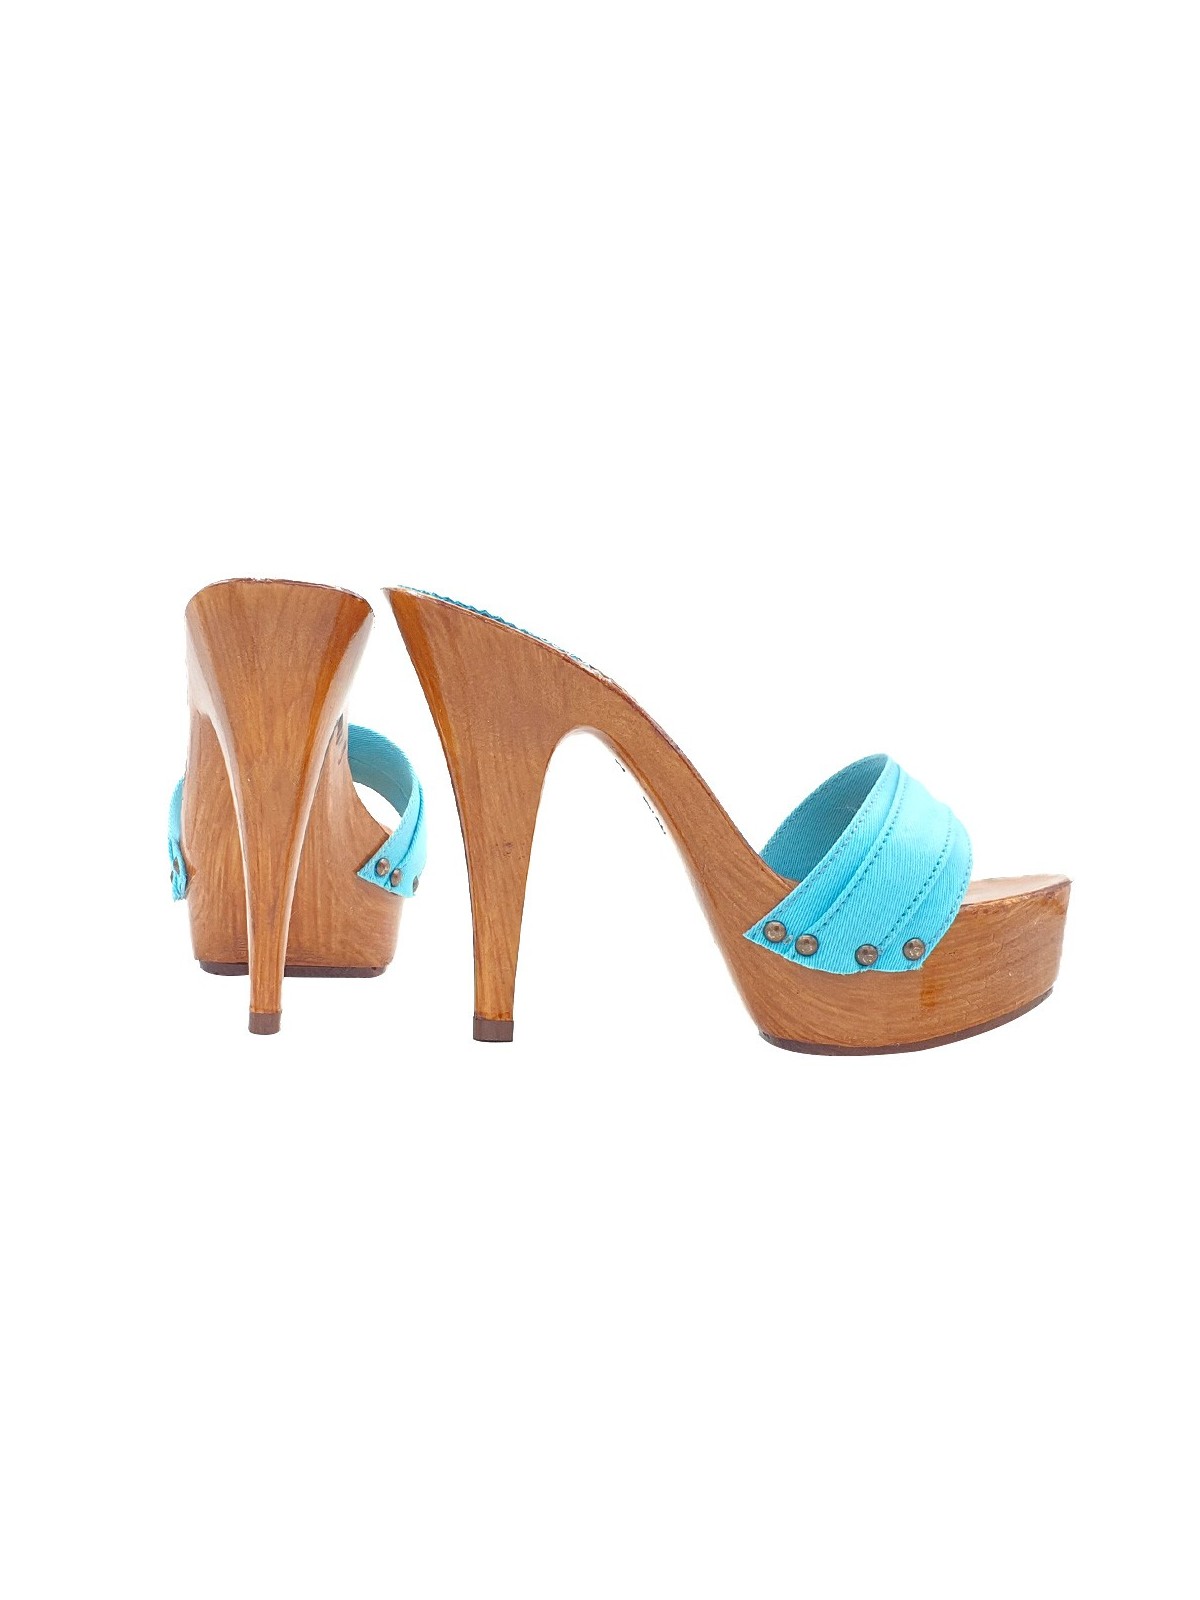 CLOGS WITH TURQUOISE BAND AND HEEL 13